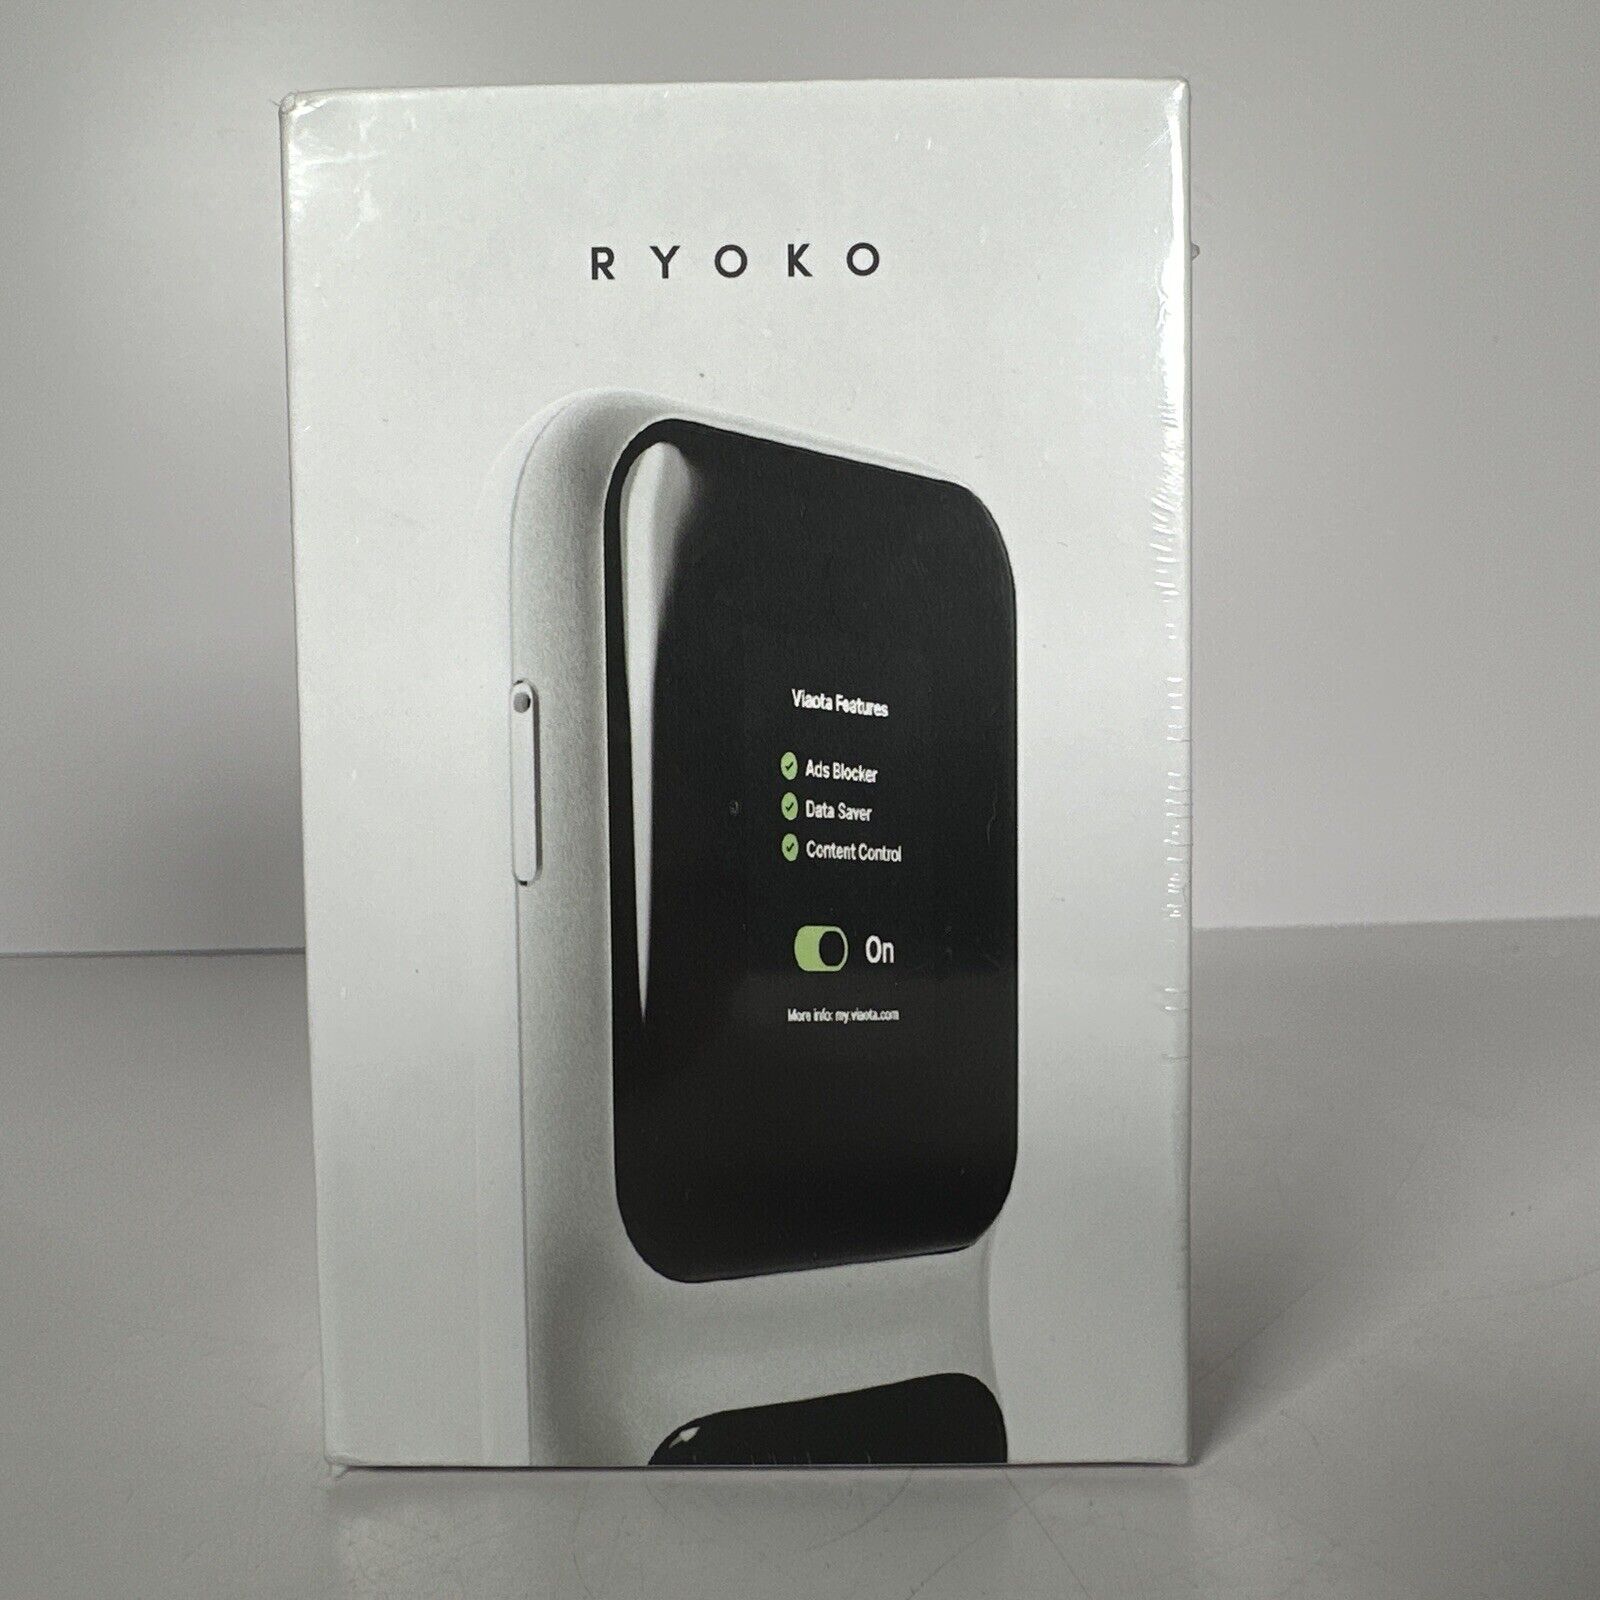 Ryoko Pro High-Speed Portable 4G LTE Wi-Fi Router New